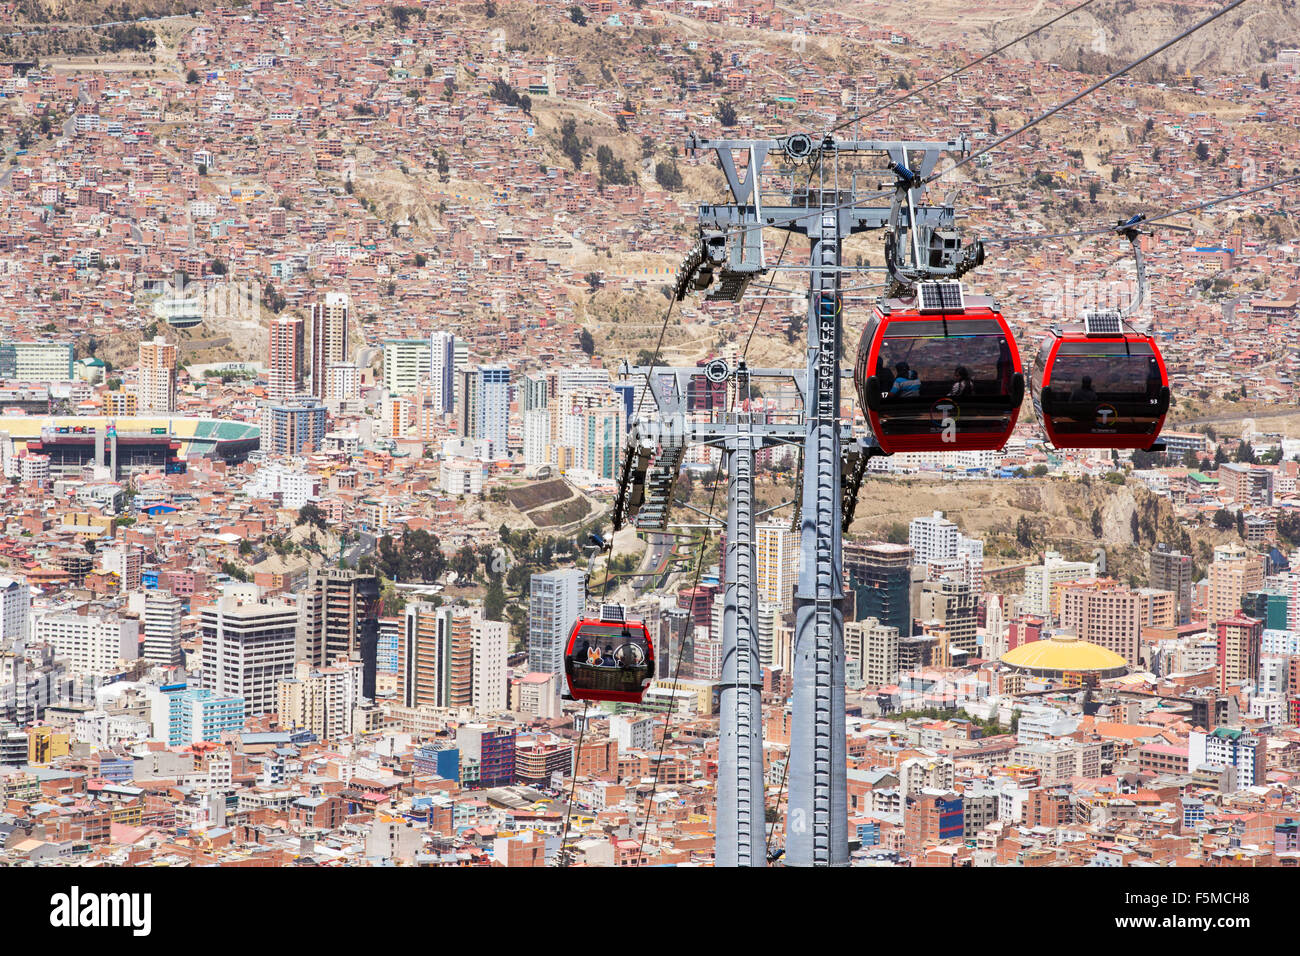 A modern cable car system in La Paz, Bolivia. Stock Photo